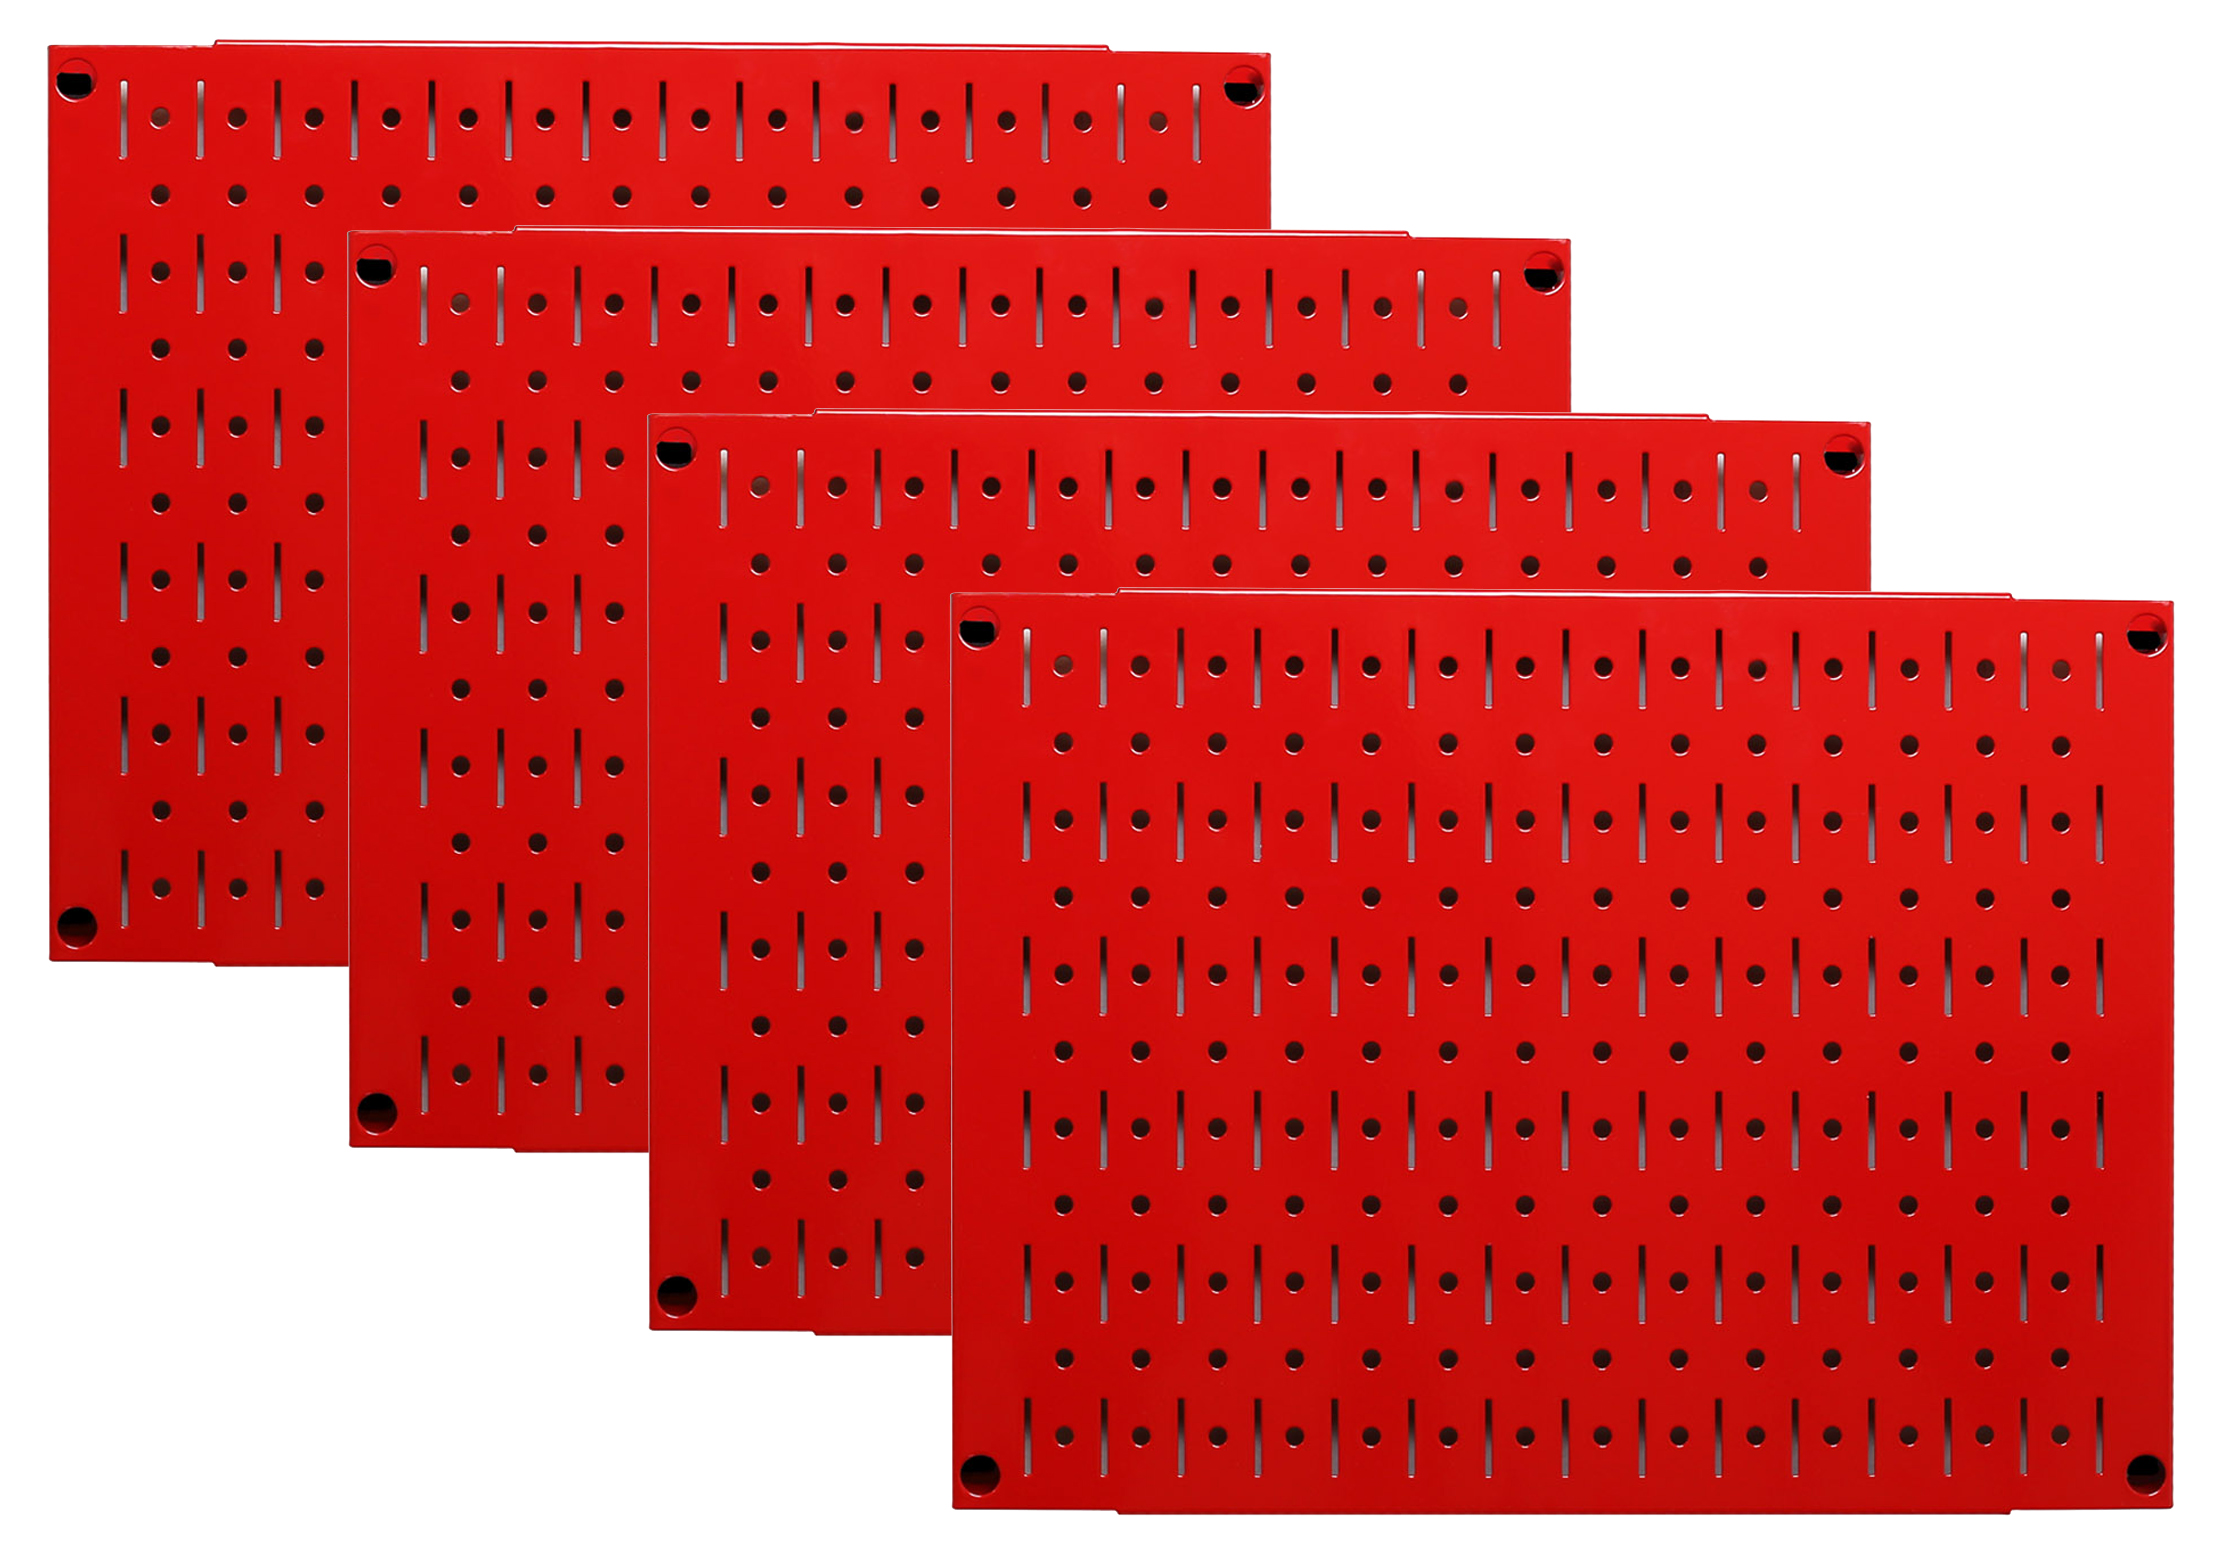 Pegboard Wall Organizer Tiles - Wall Control Modular Metal Pegboard Tiling Set - Four 12-Inch Tall x 16-Inch Wide Red Peg Board Panel Wall Storage Tiles - Easy to Install (Red) - image 1 of 10